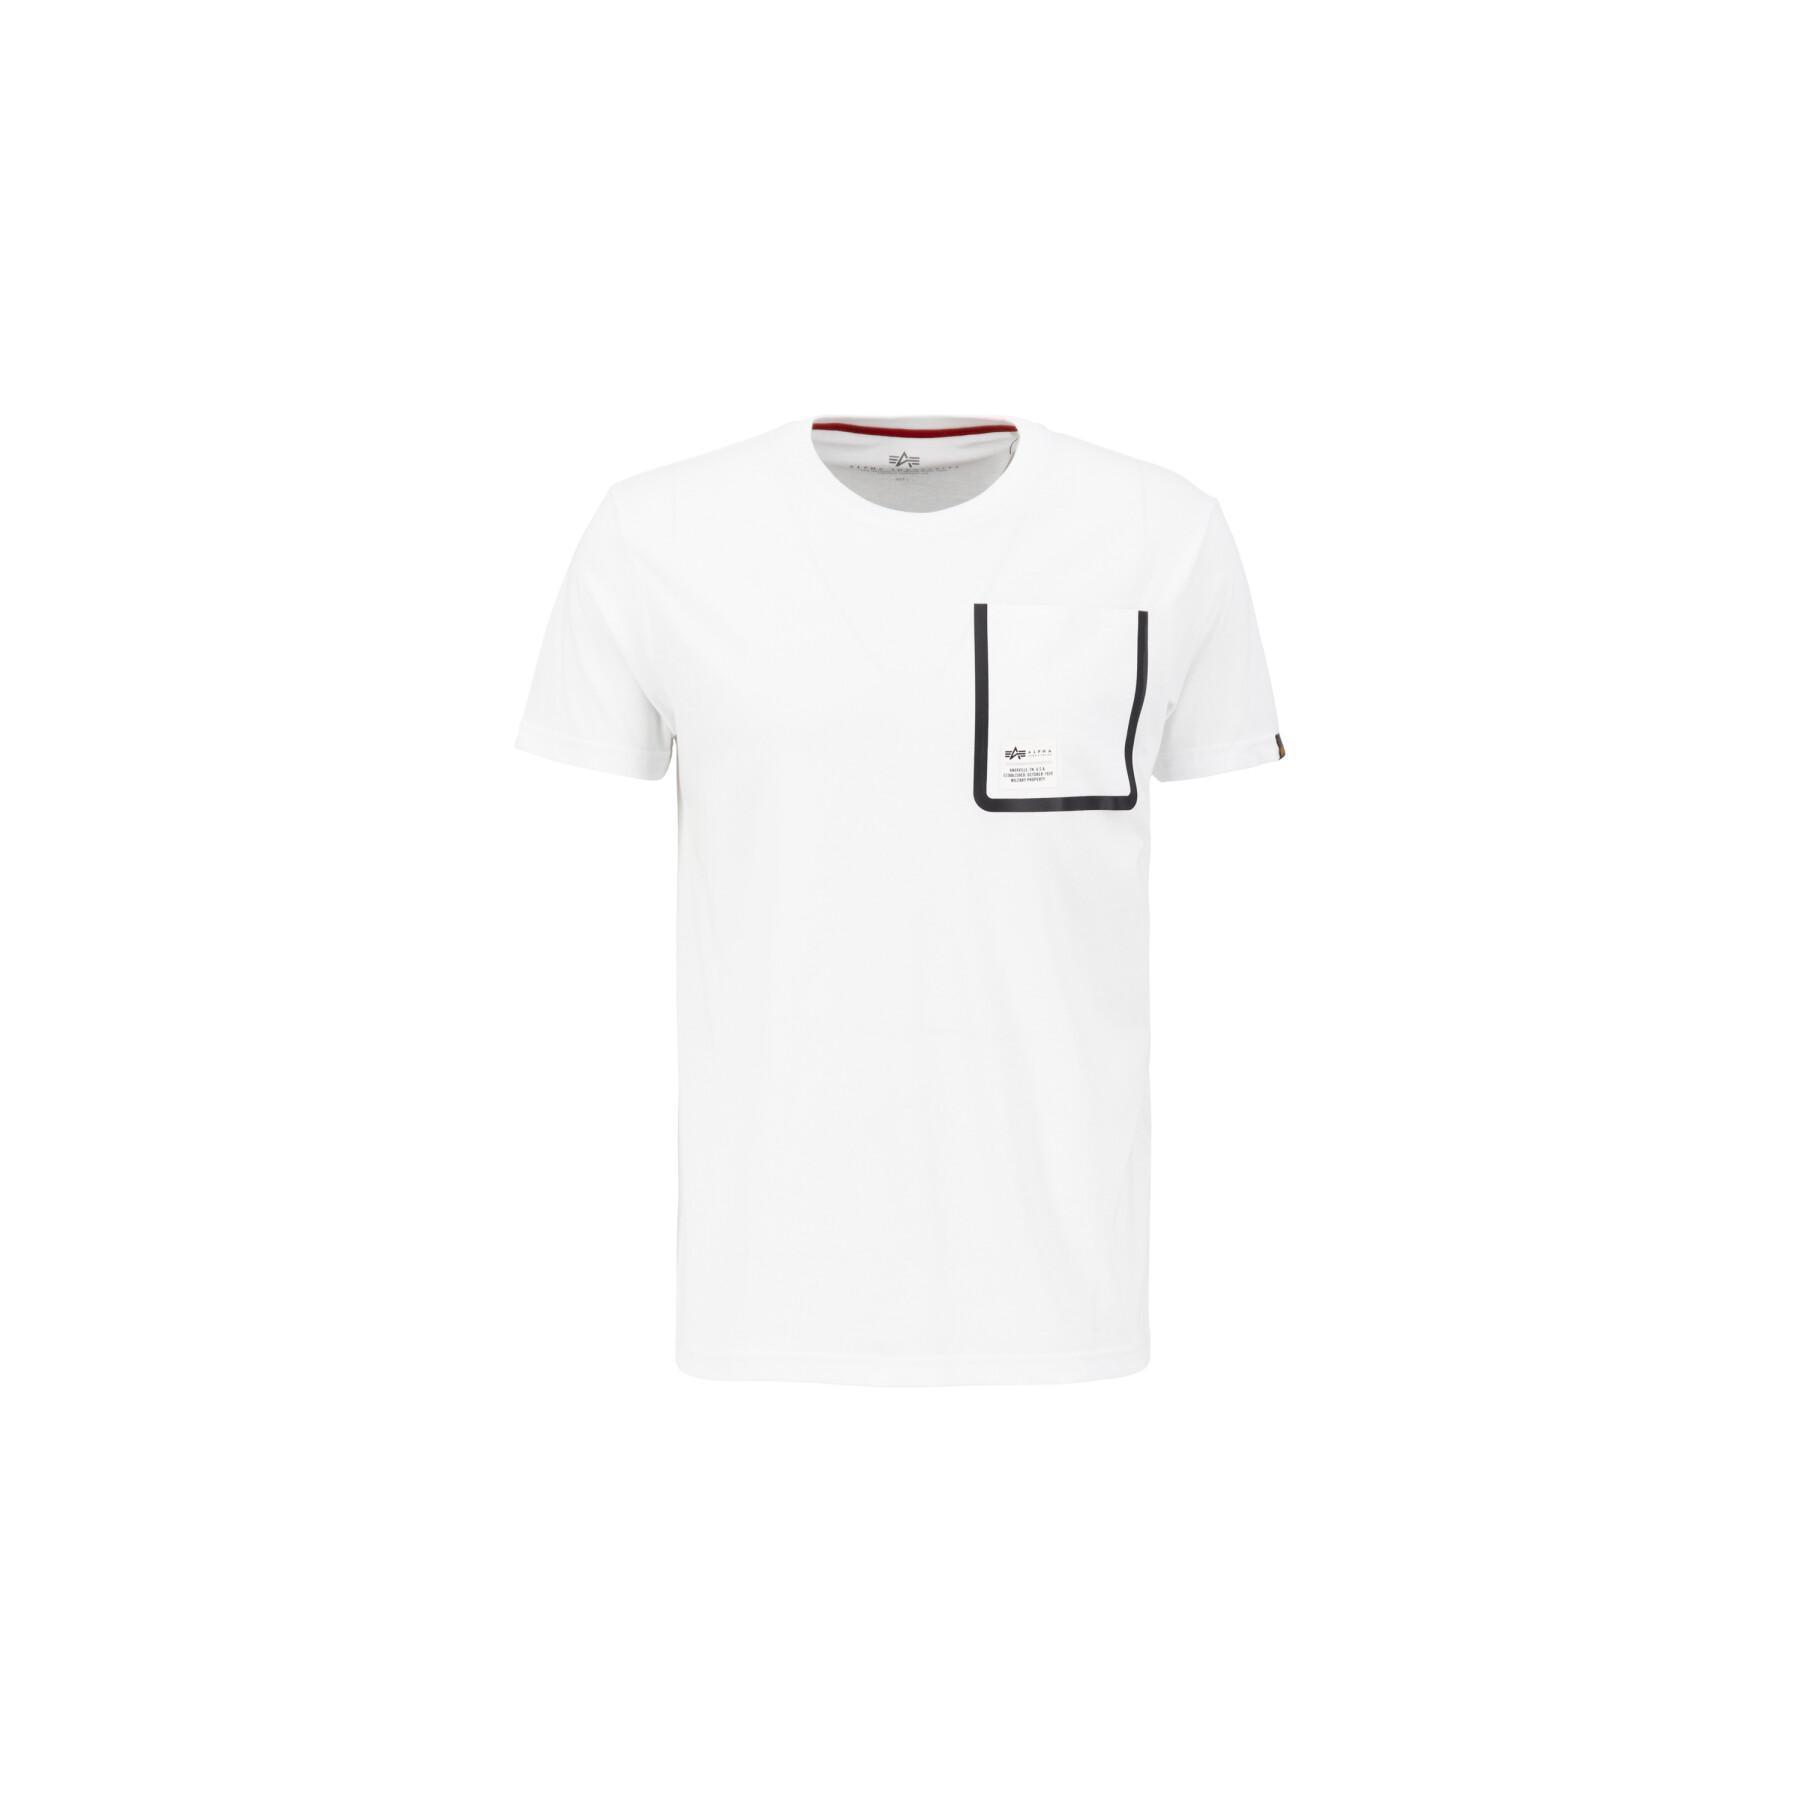 T-shirt with pocket Alpha Industries Label - T-shirts & Polo shirts -  Clothing - Men